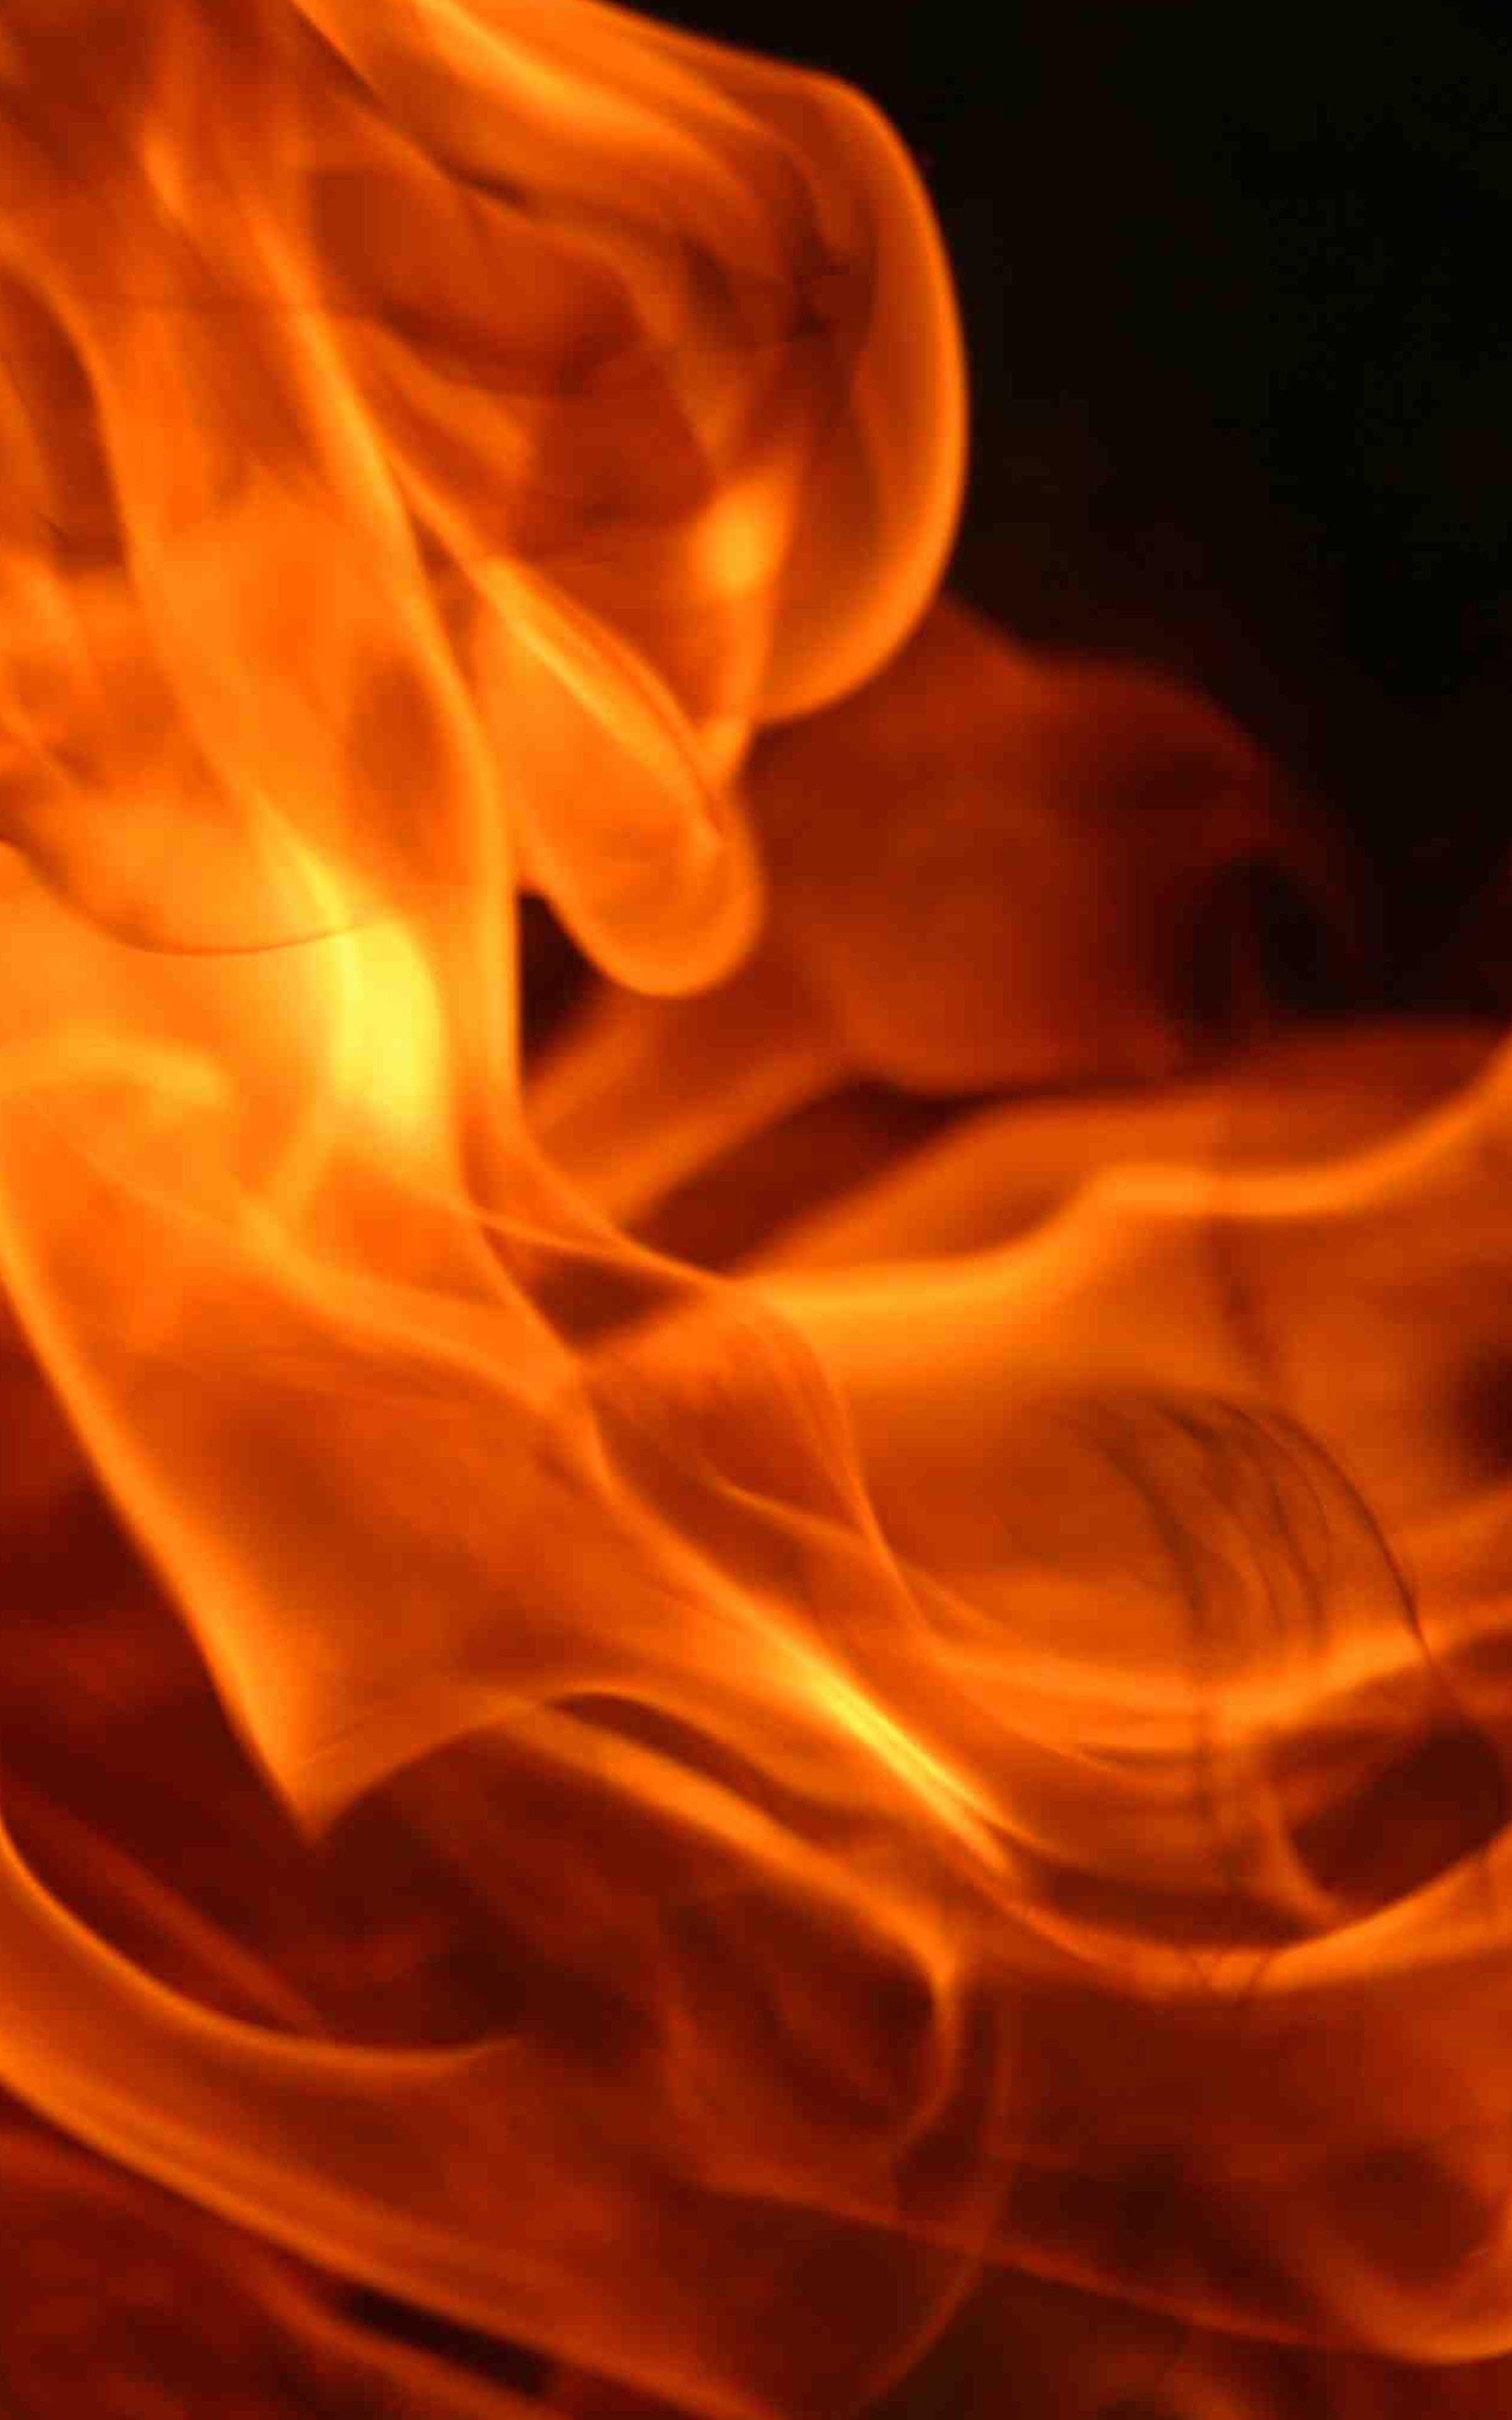 Flame Wallpaper Cool Flame Wallpaper for Android